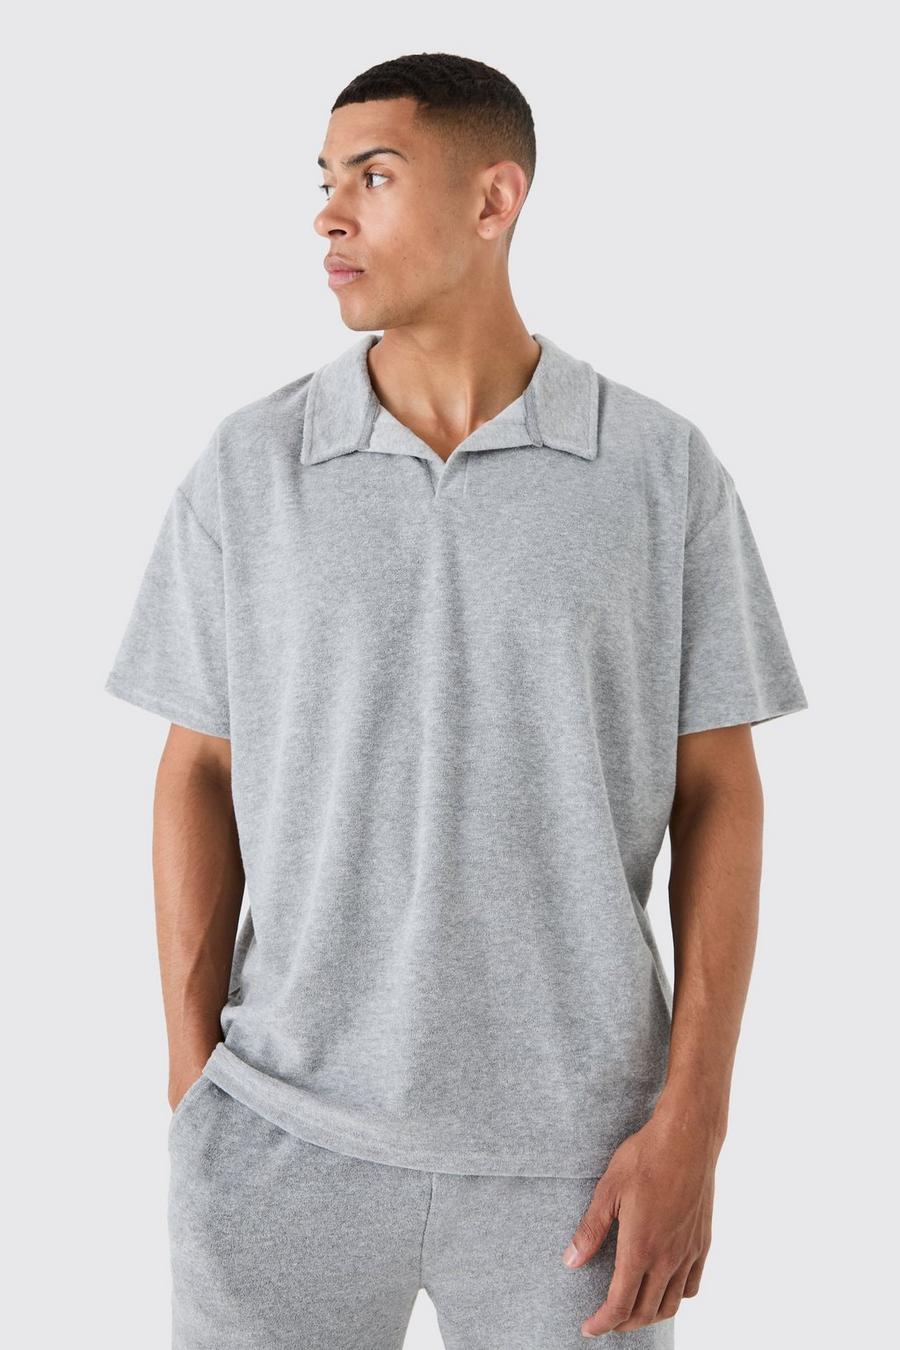 Grey marl Oversized Revere Towelling Polo